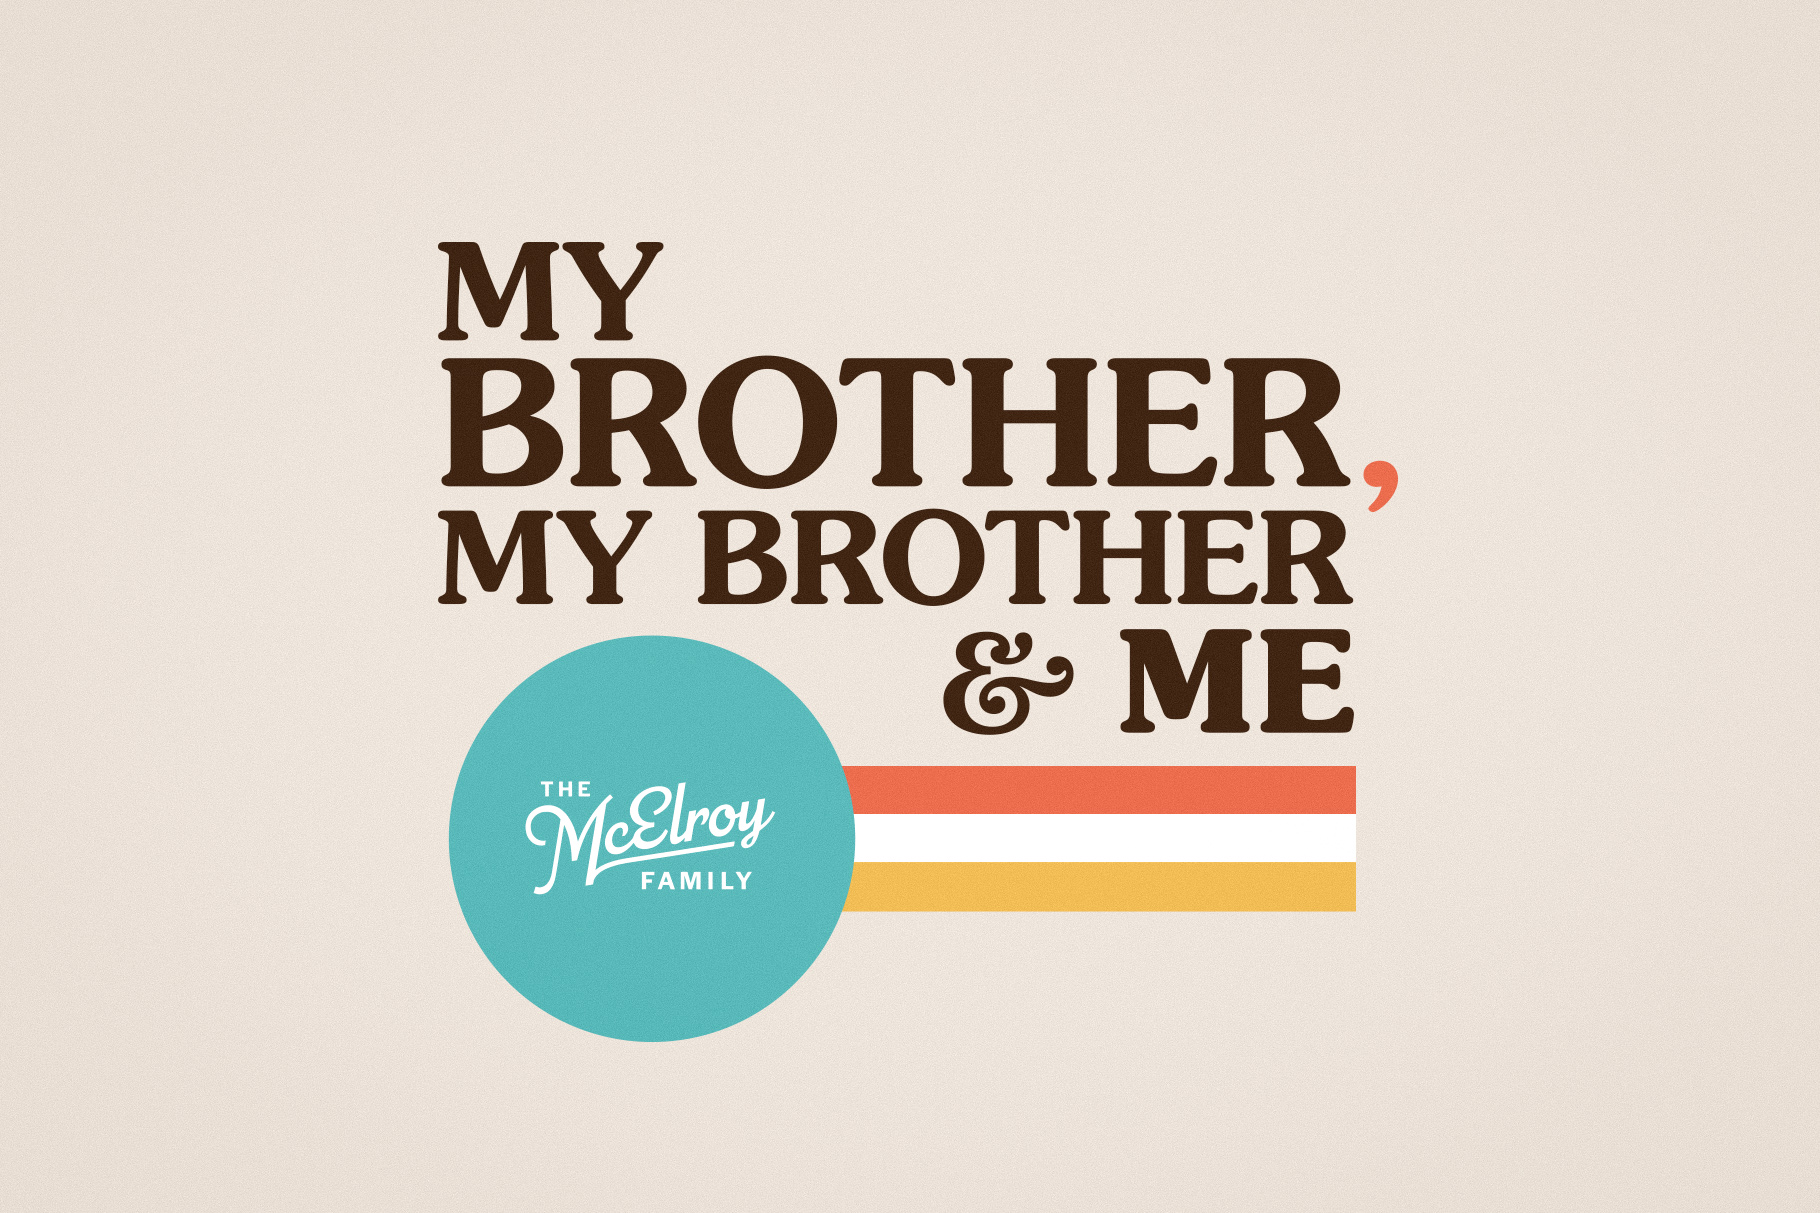 My Brother, My Brother &amp; Me written in brown text on a cream background. There are three horizontal stripes - teal, white, and yellow- overlapped by a red half circle. The Mcelroy Family logo is in the bottom right corner in teal.